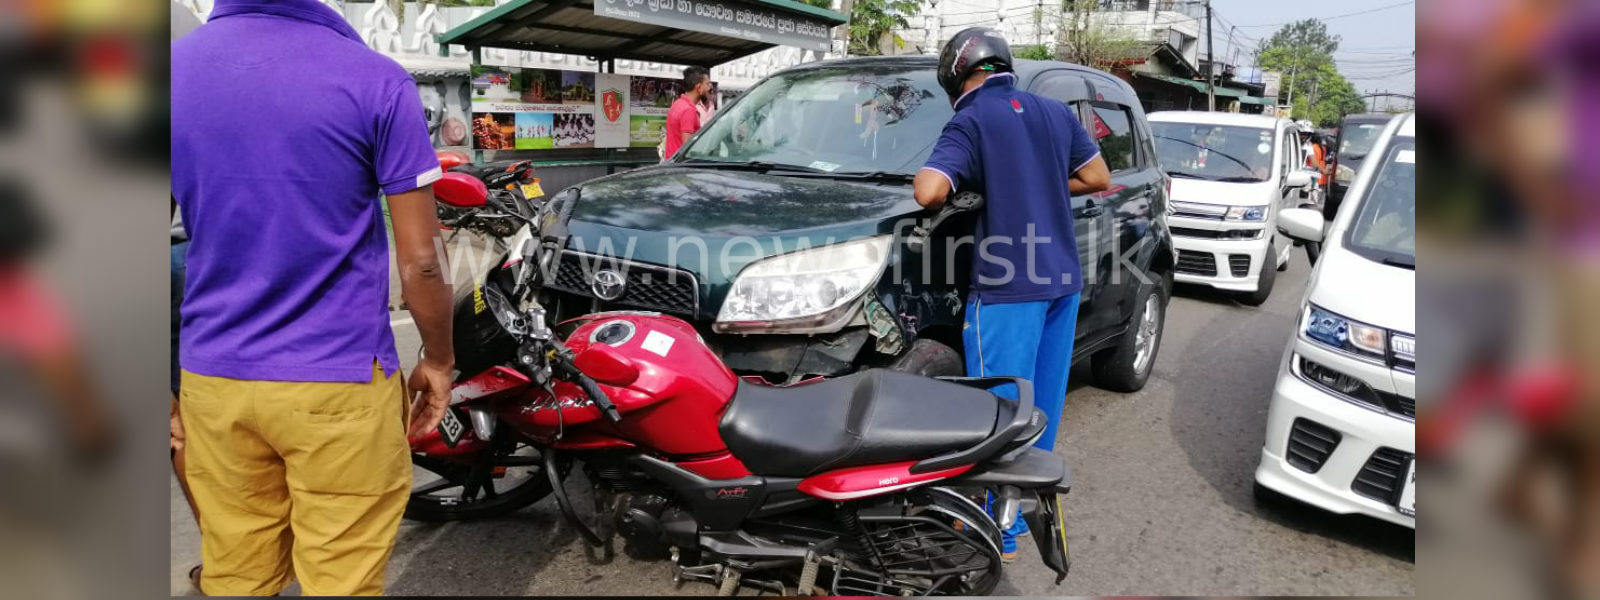 Van collides into two three wheelers and a bike: 11 injured